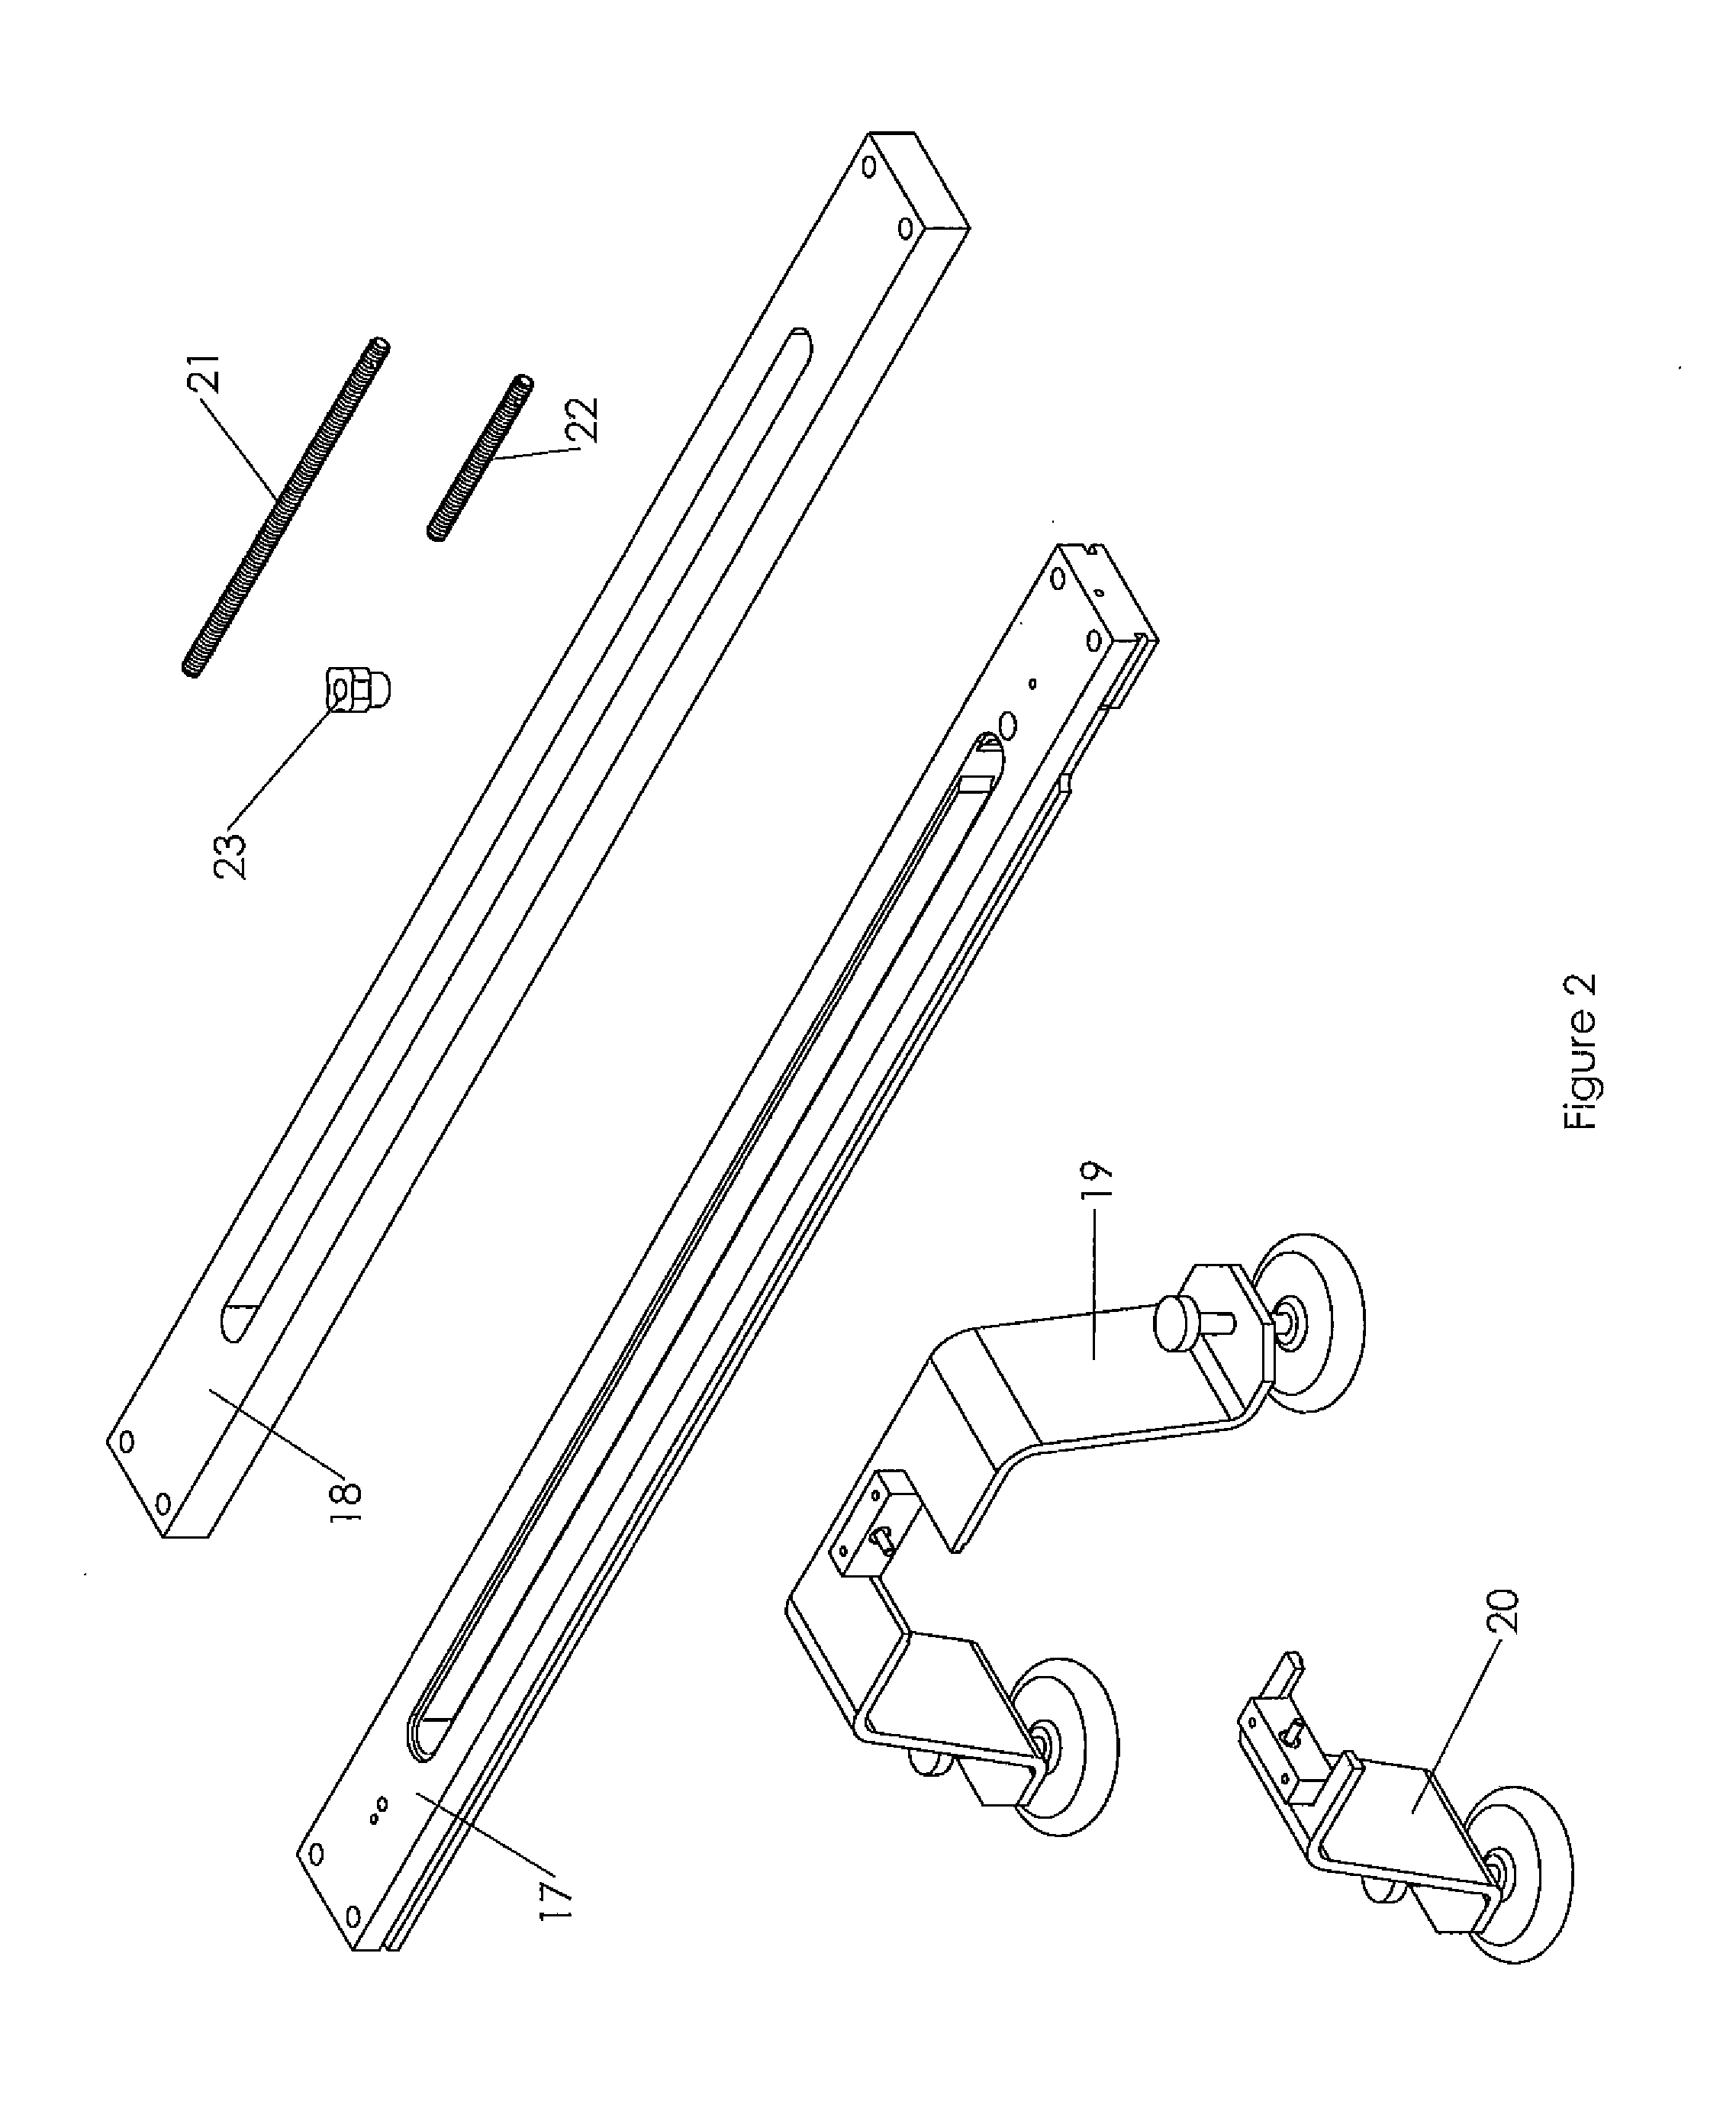 Apparatus for facilitating work on stringed instruments